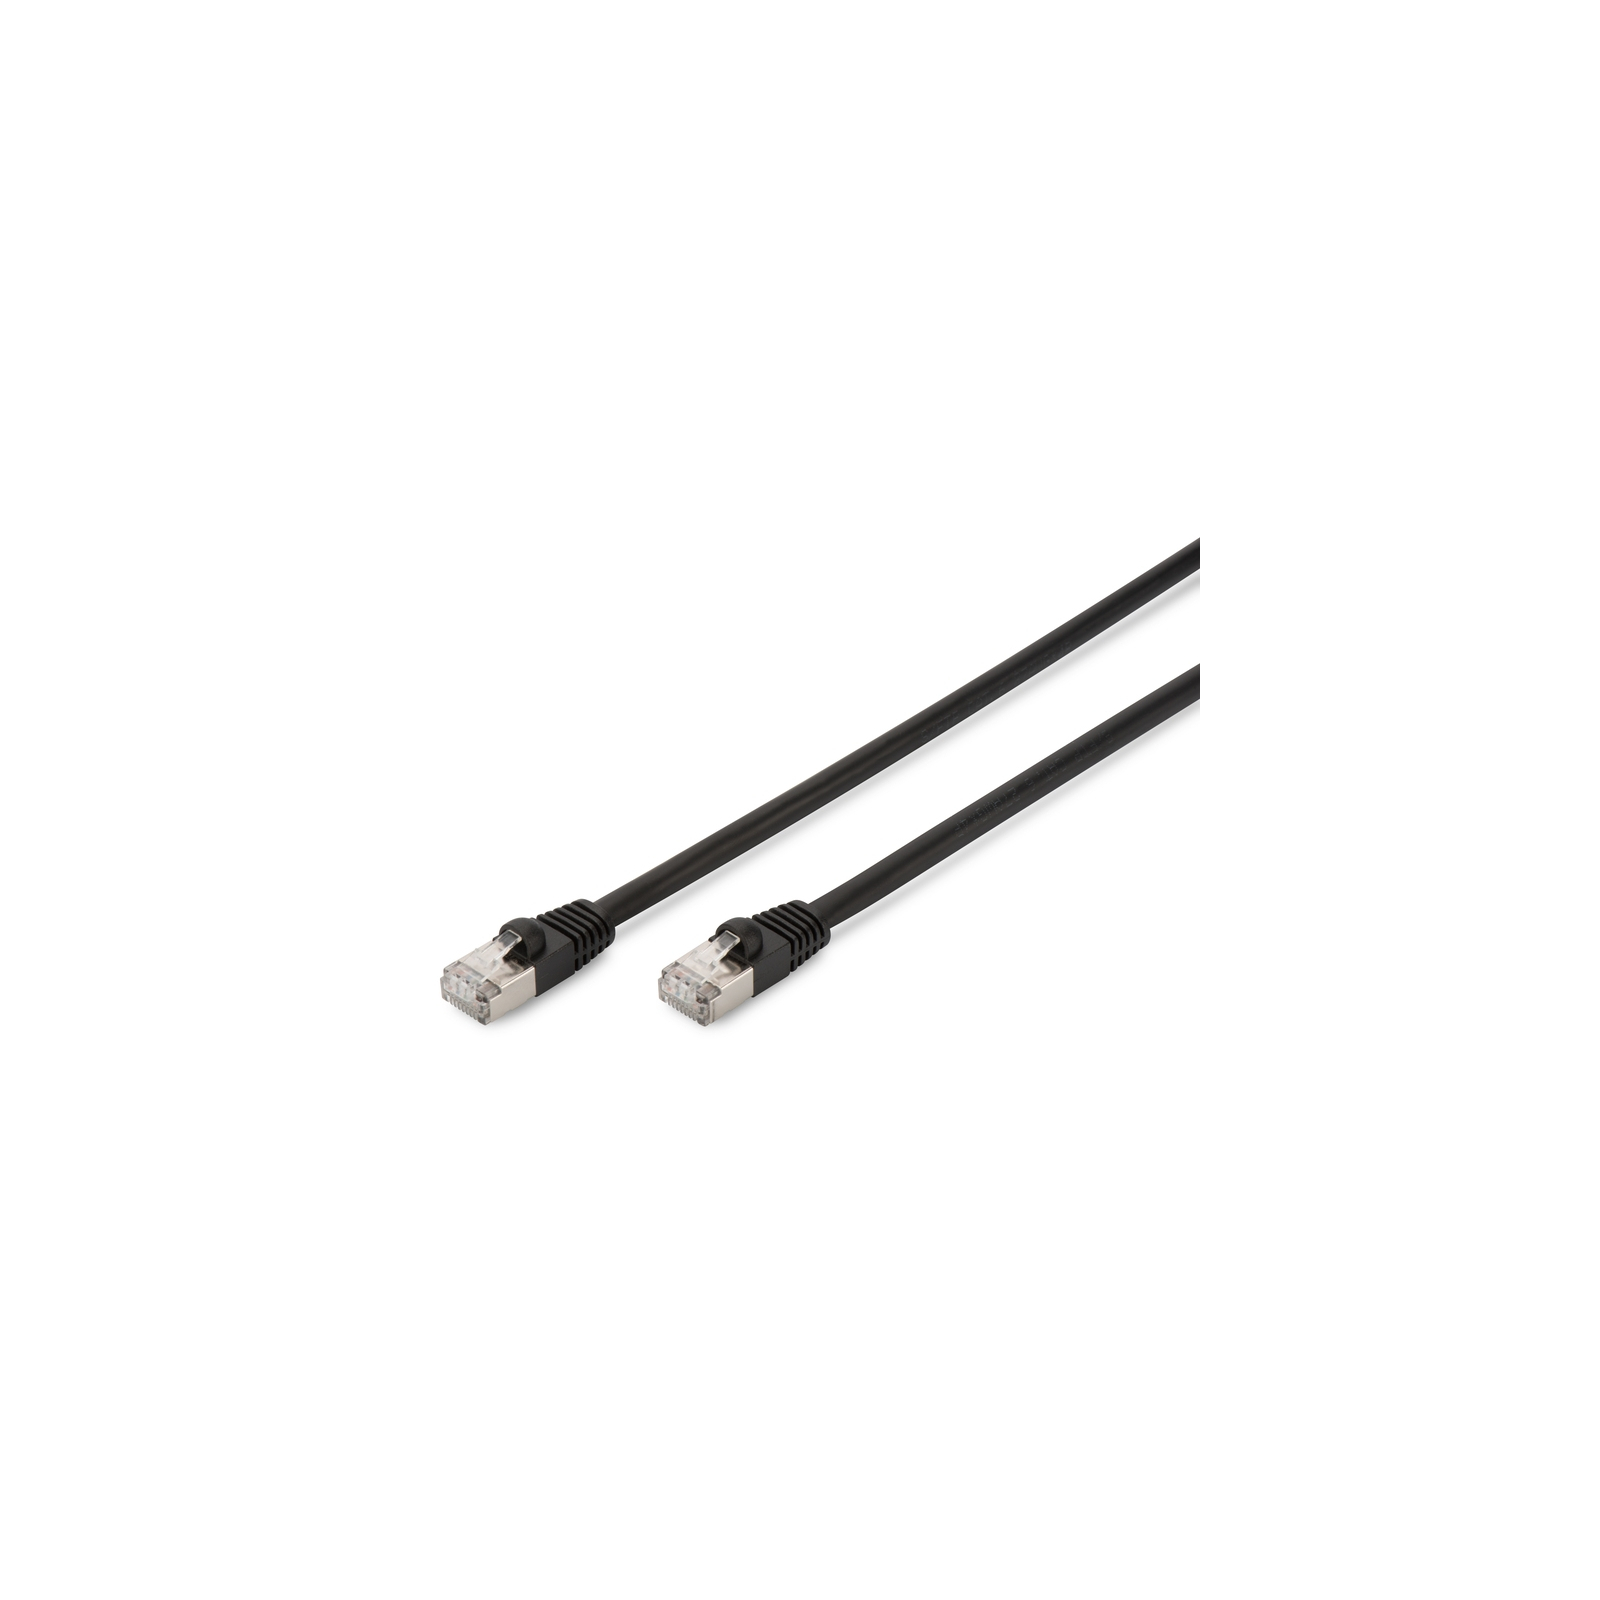 Патч-корд 1м, CAT 6 S-FTP, AWG 27/7, FRPE, outdoor Digitus (DK-1644-010/BL-OD)